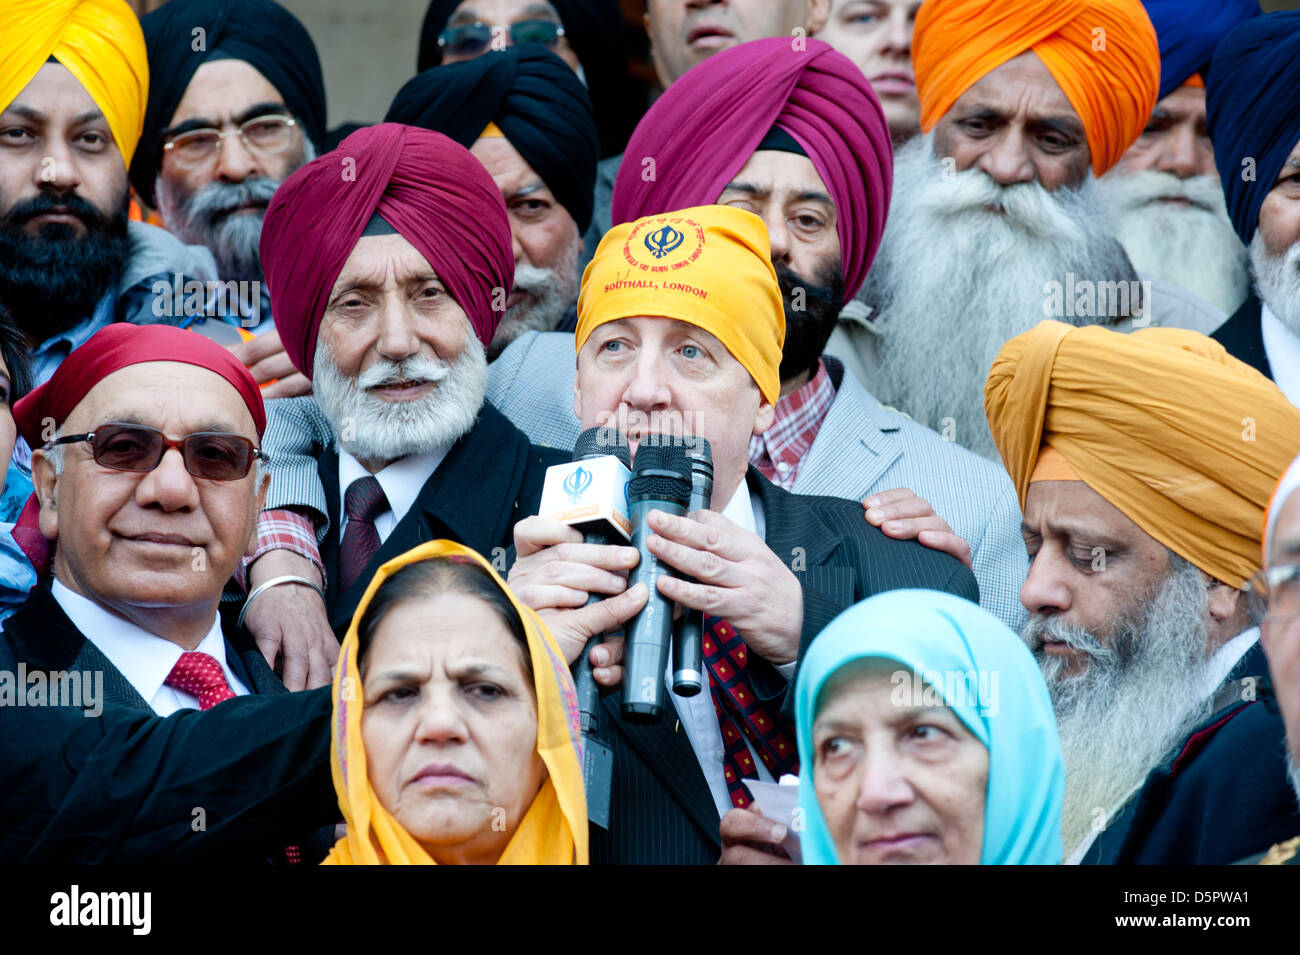 London, UK. 7th April 2013. a member of the Ealing council joins the Sikh community for the Nagar Kirtan celebrations in Southall, London. Credit: Piero Cruciatti/Alamy Live News Stock Photo